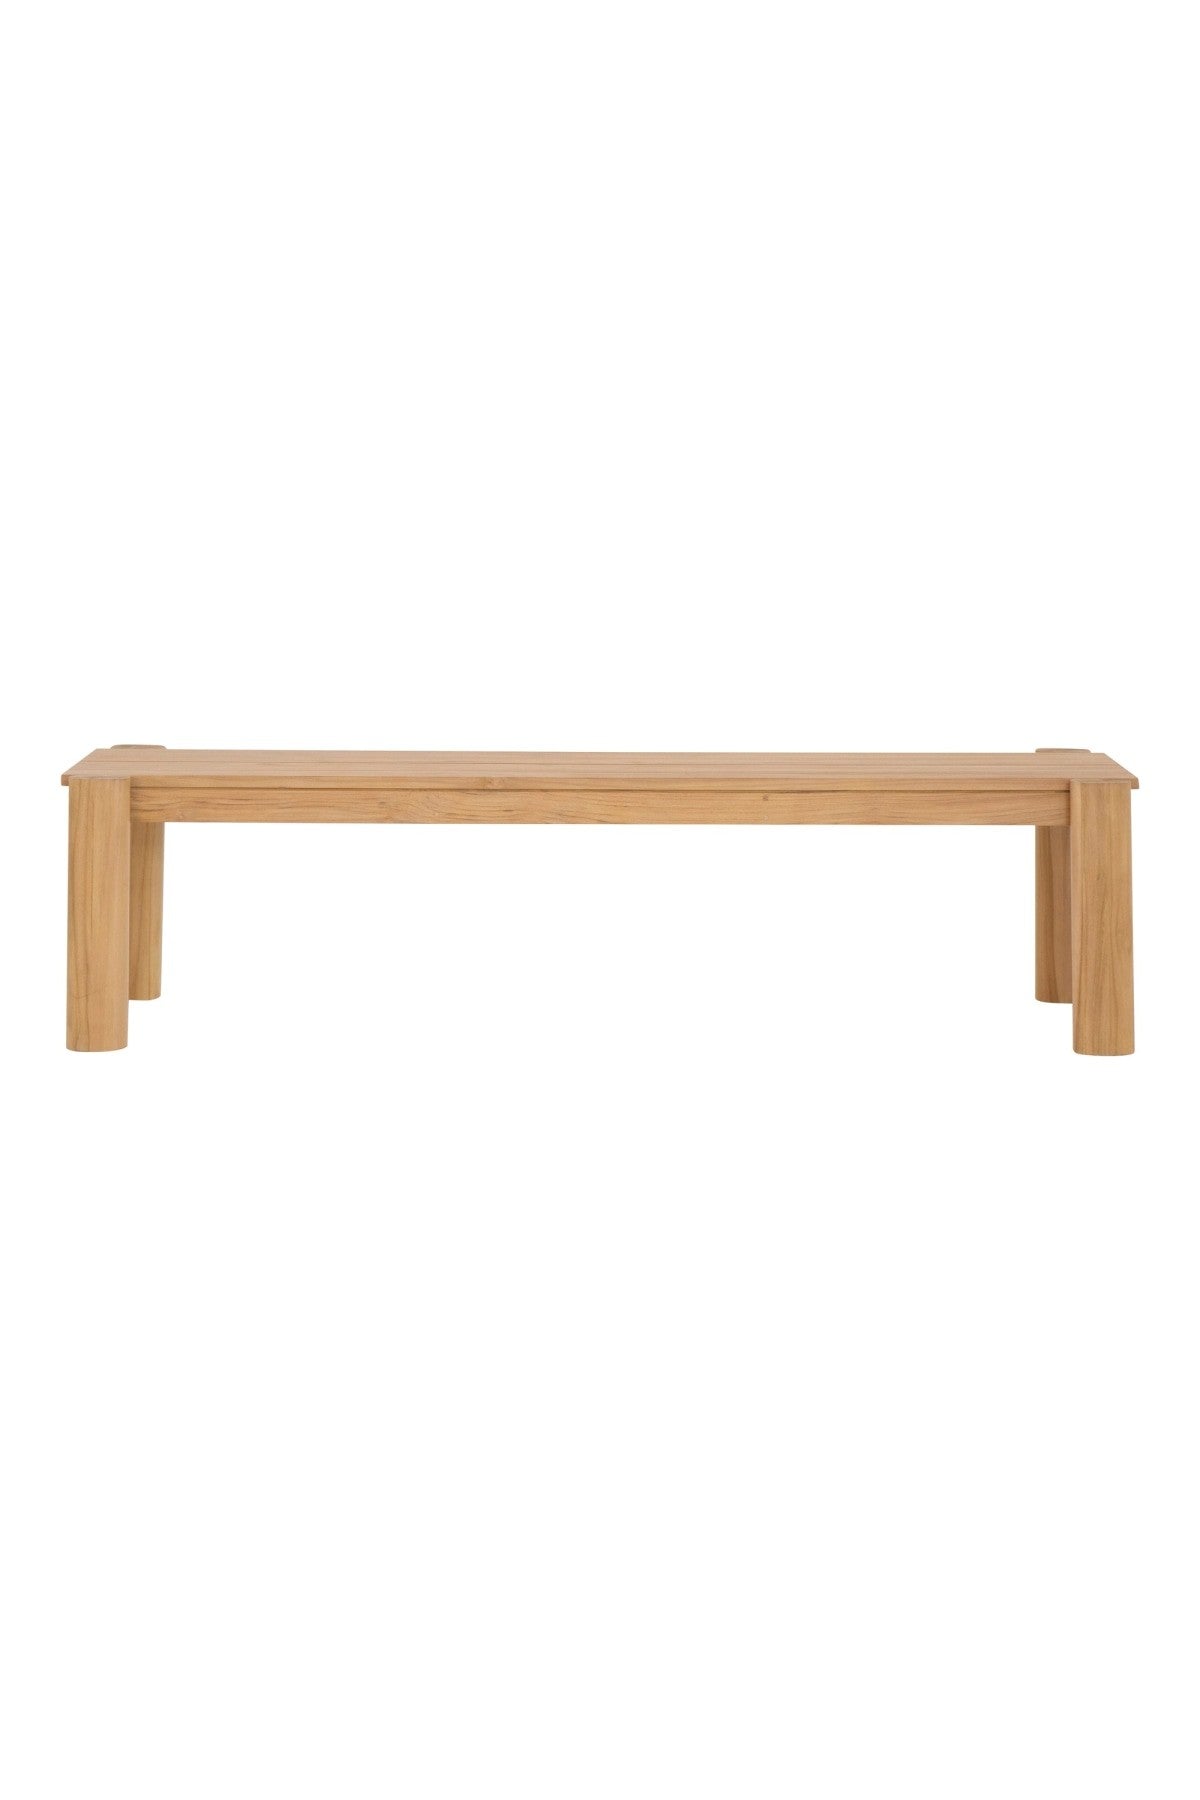 Temple Outdoor Dining Bench